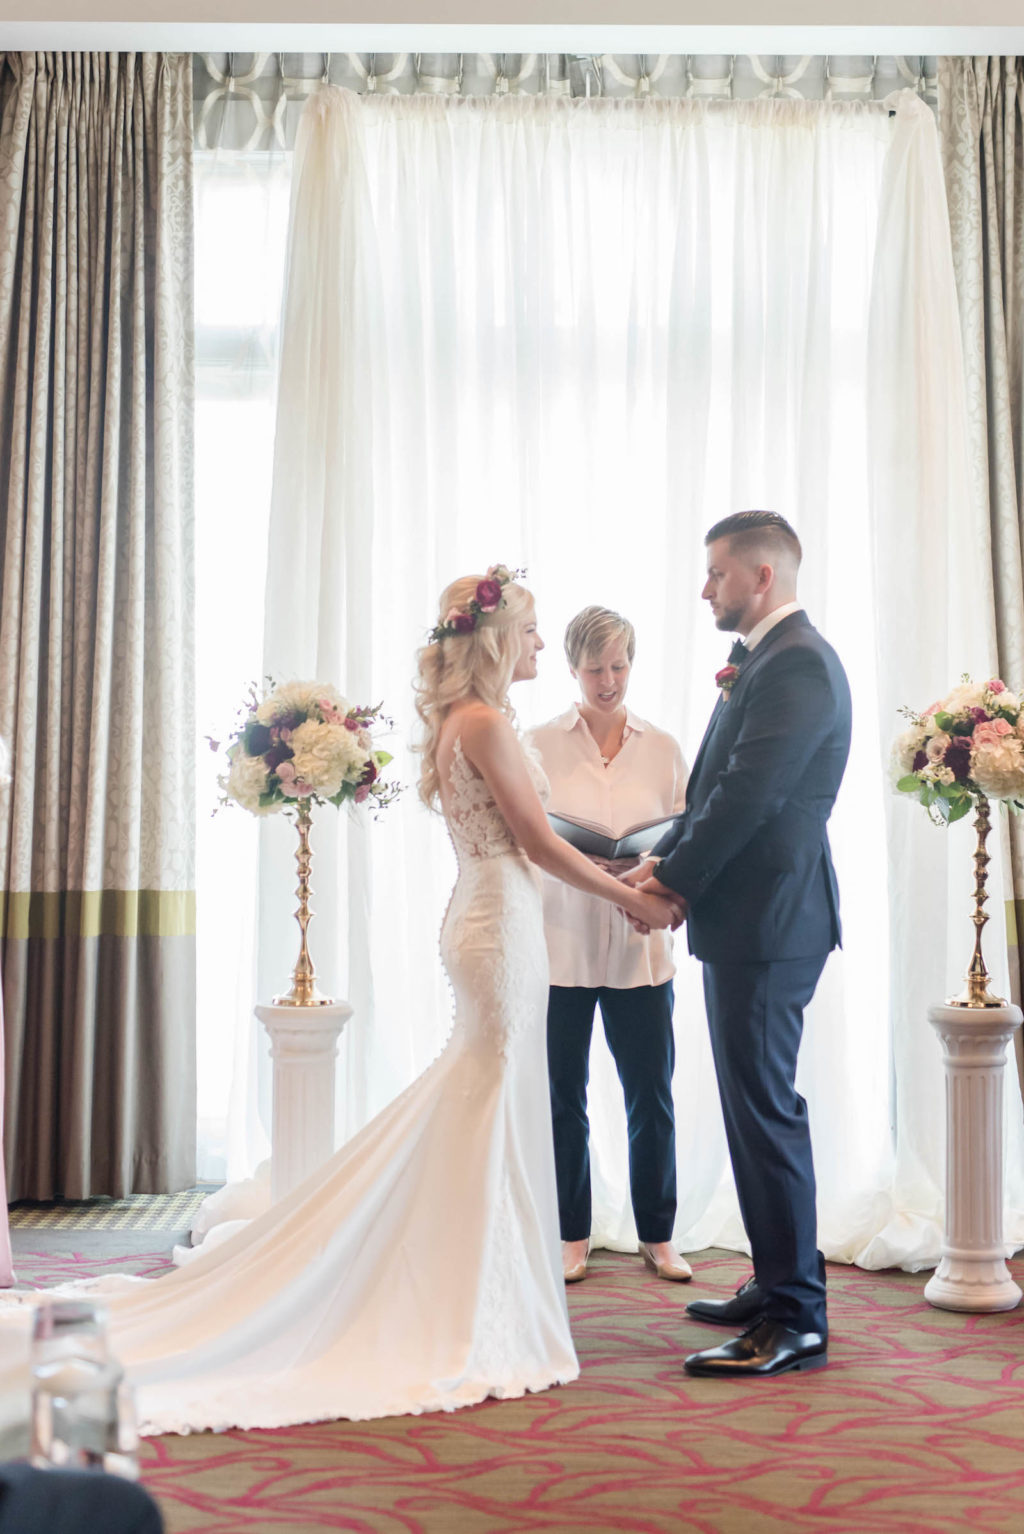 Bride and Groom Exchanging Vows | St. Pete Wedding Venue The Birchwood | Indoor Ballroom Wedding Ceremony with Floral Candlestick and Pipe and Drape Backdrop | Stella York Lace Sheath Spaghetti Strap Empire Waist Wedding Dress Bridal Gown | Groom Classic Black Suit Tux